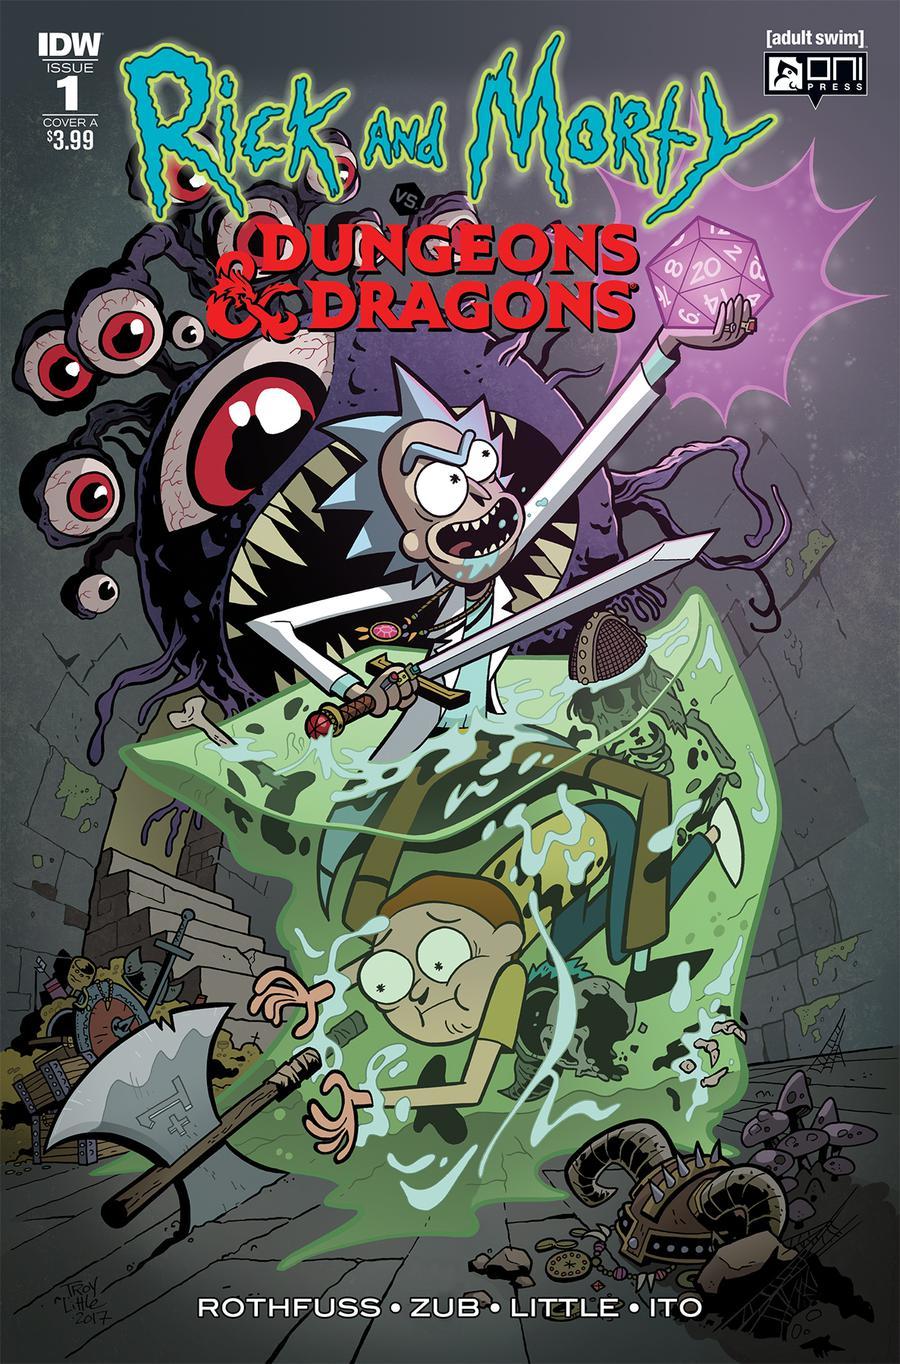 Rick And Morty vs Dungeons & Dragons Vol. 1 #1